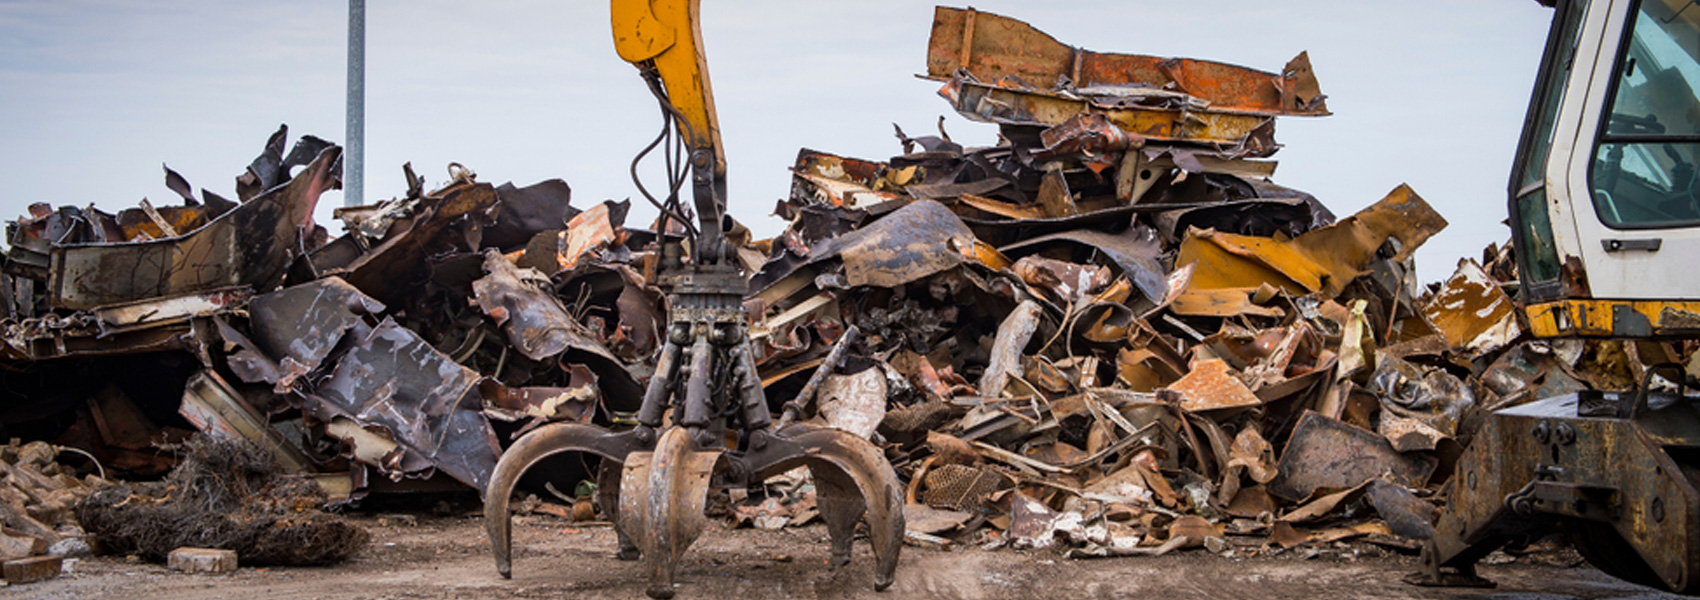 Top 5 Most Valuable Scrap Metals To Collect And Resell